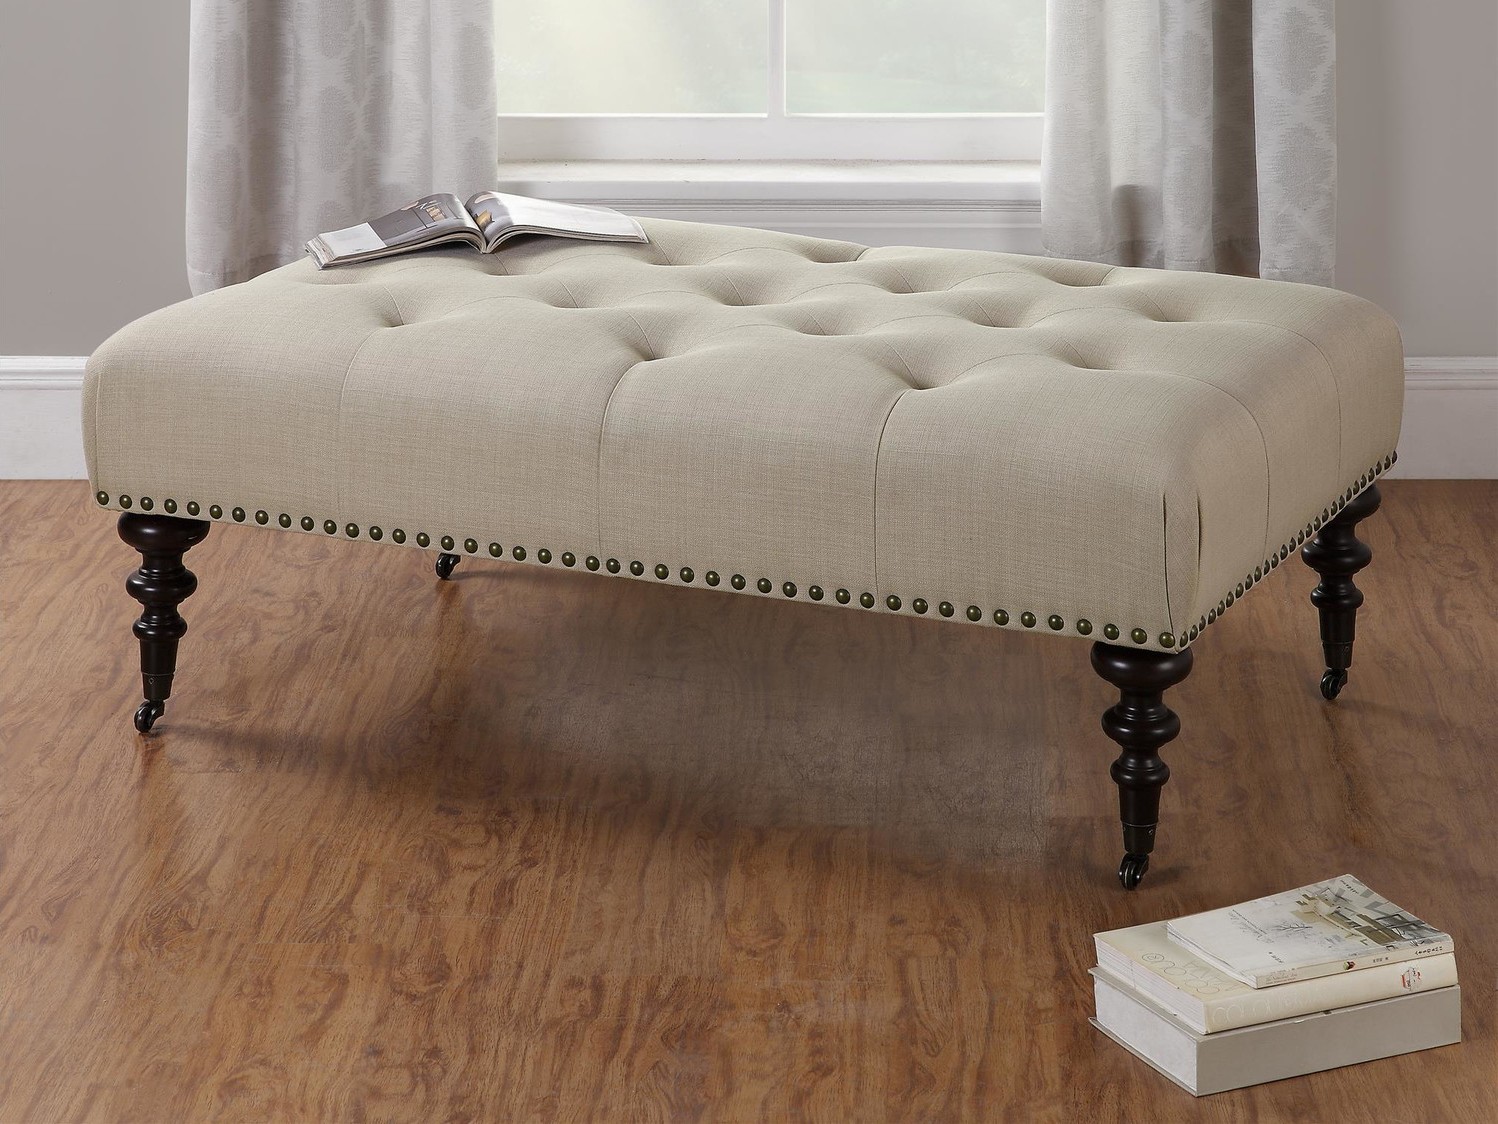 Tufted Ottoman Coffee Table Design Images Photos Pictures